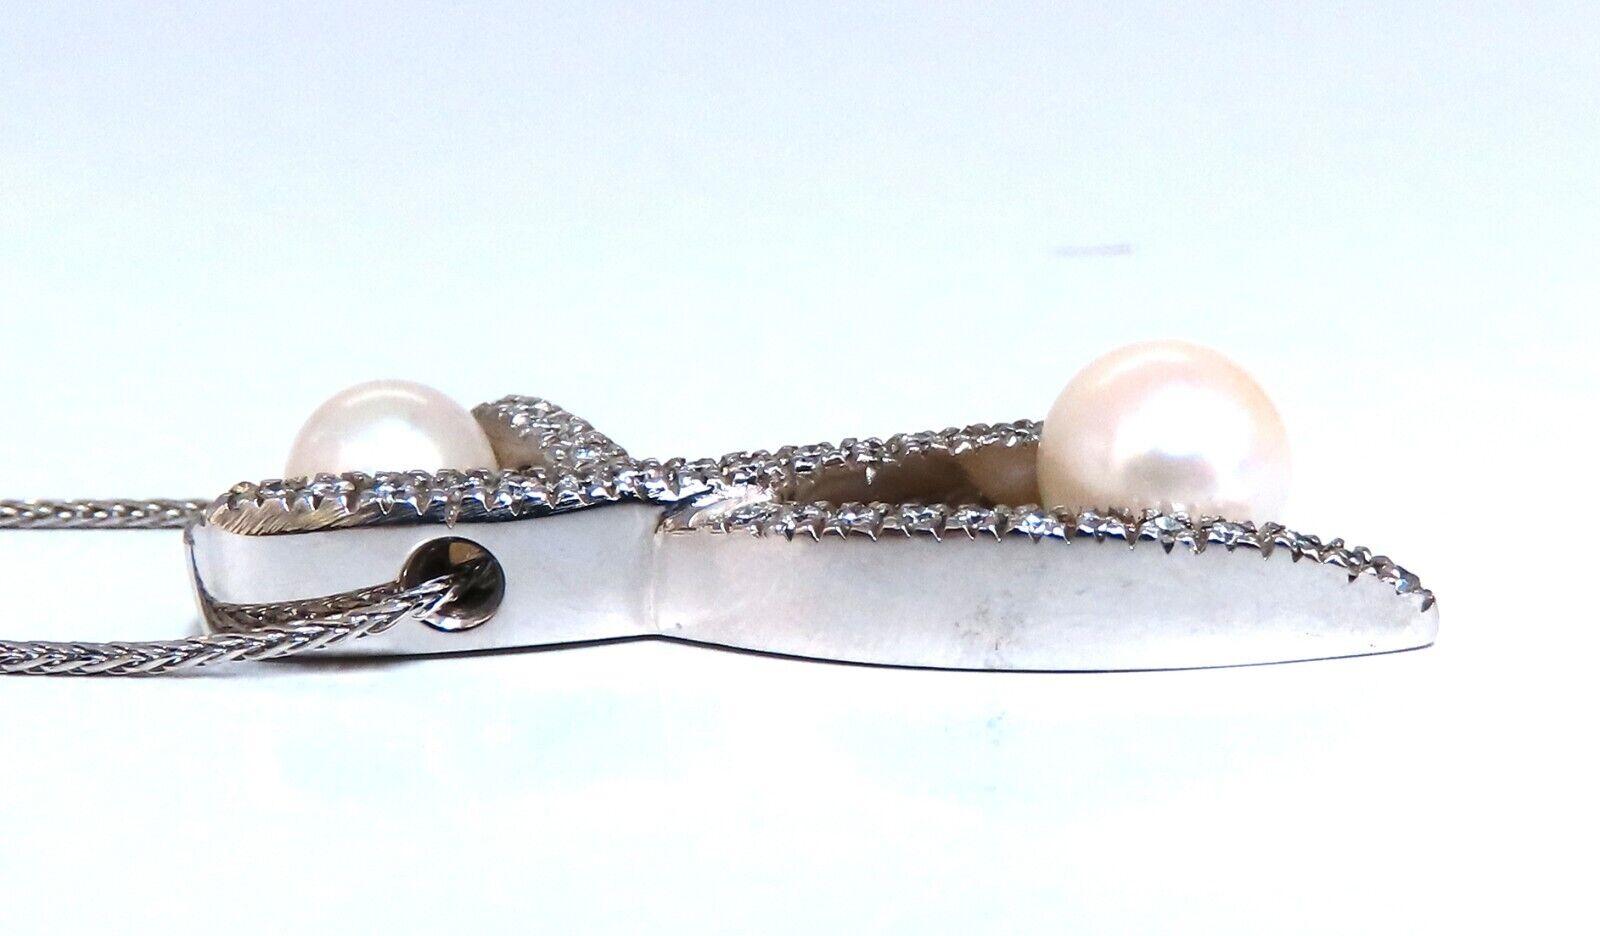 8 mm natural South Sea Pearl necklace.

Smaller Pearl 6.5 mm

.75 carat natural round diamonds

H color vs2 clarity

18 karat white gold pendant.

Chain measures 18 in long

14 karat white gold.

Pendant measures 38x12 mm

Depth: 5mm

Total weight